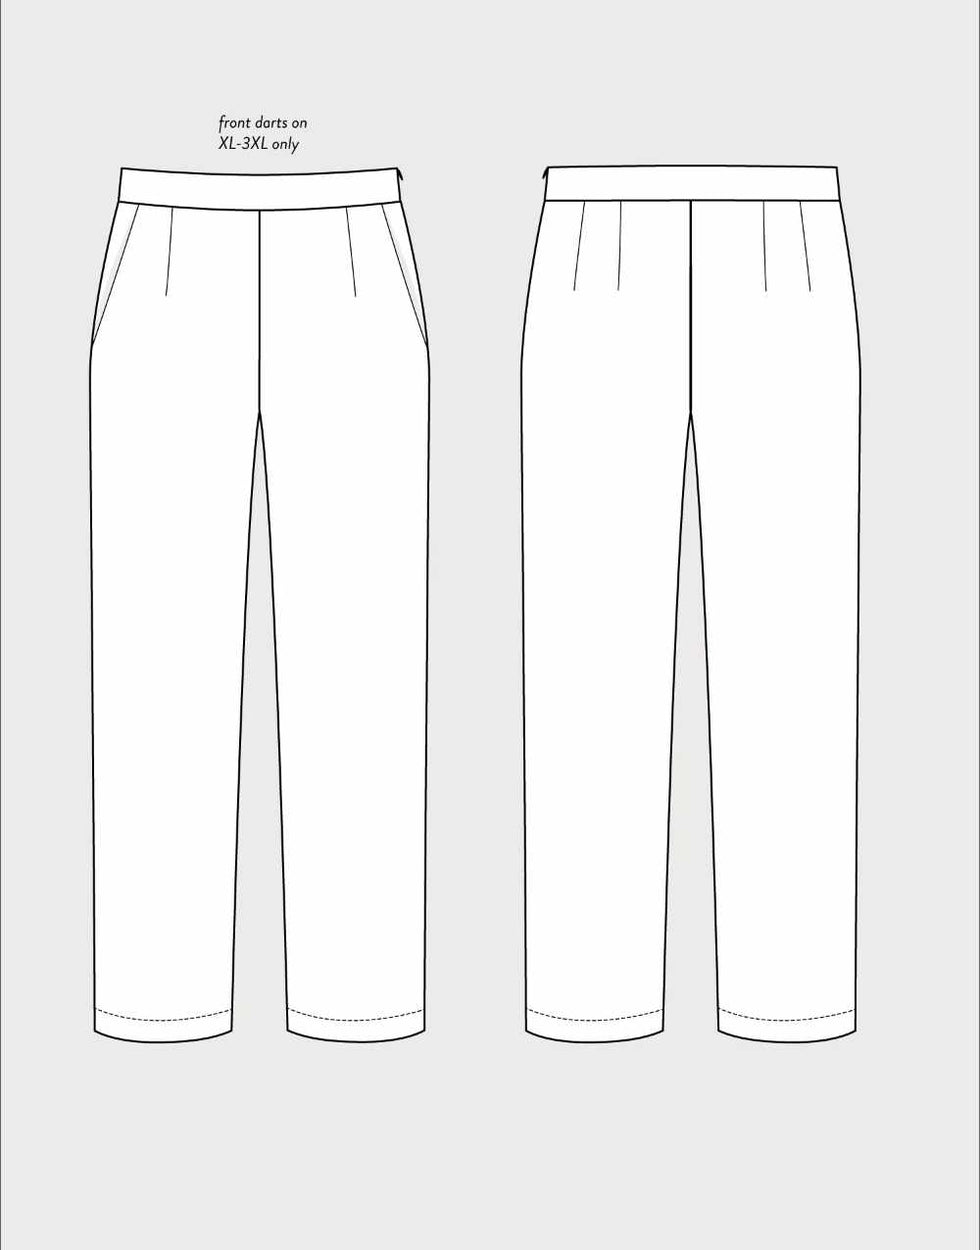 Regular Fit Trousers Sewing Pattern, The Assembly Line – Clothkits